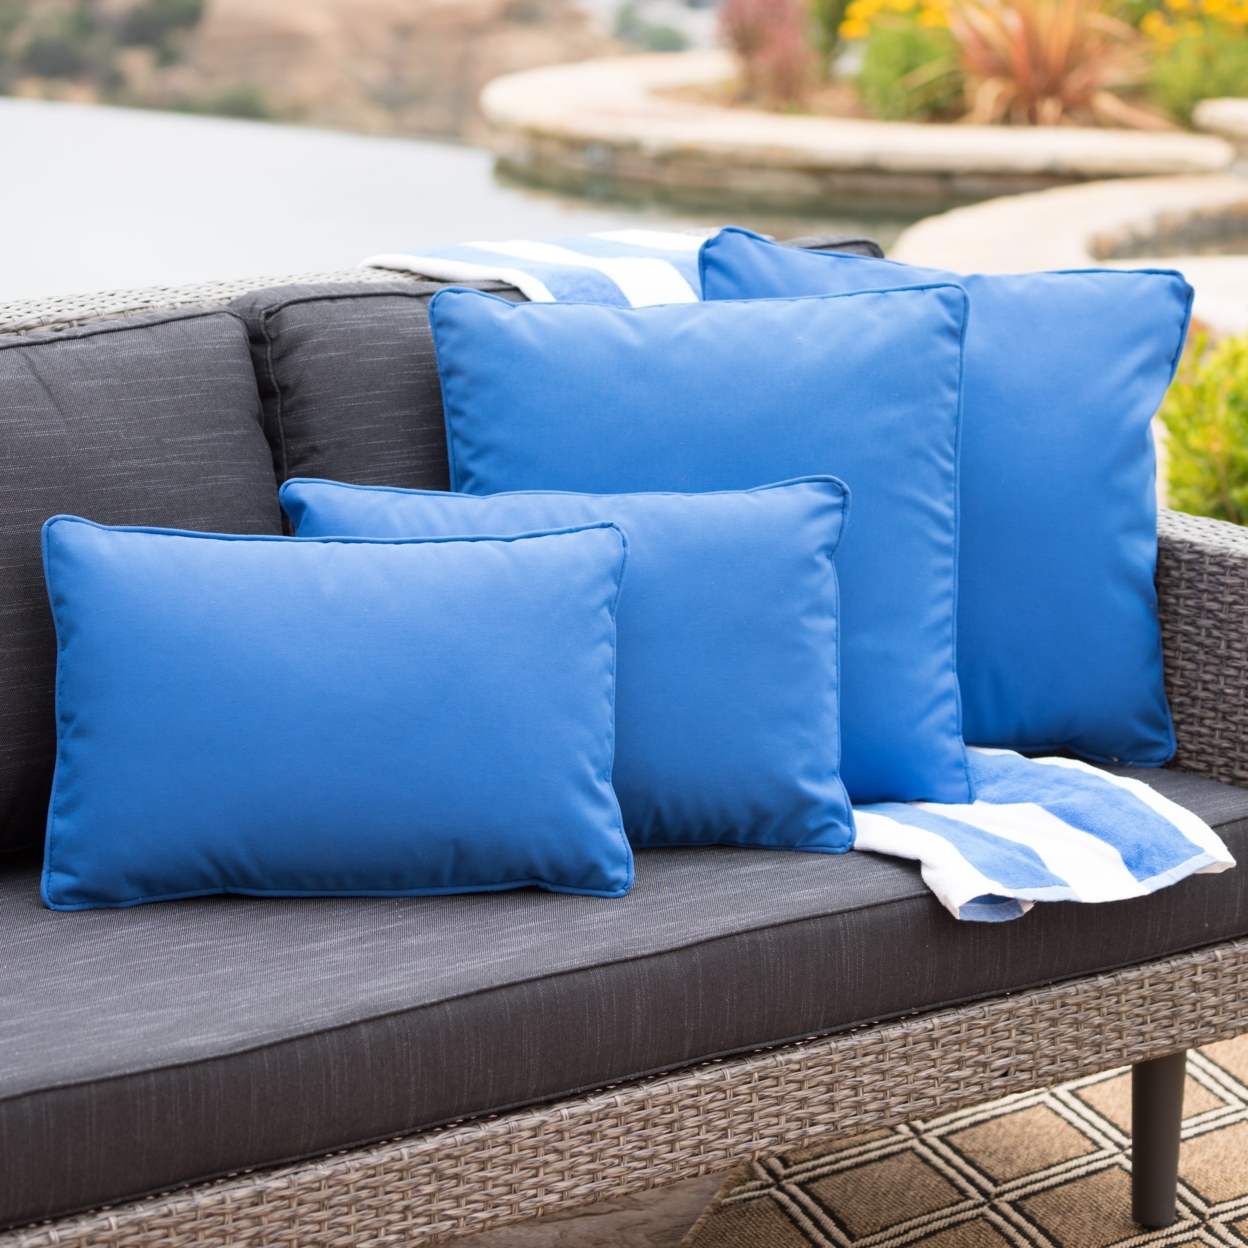 Corona Outdoor Patio Water Resistant Pillow Sets - Green, Set Of 4